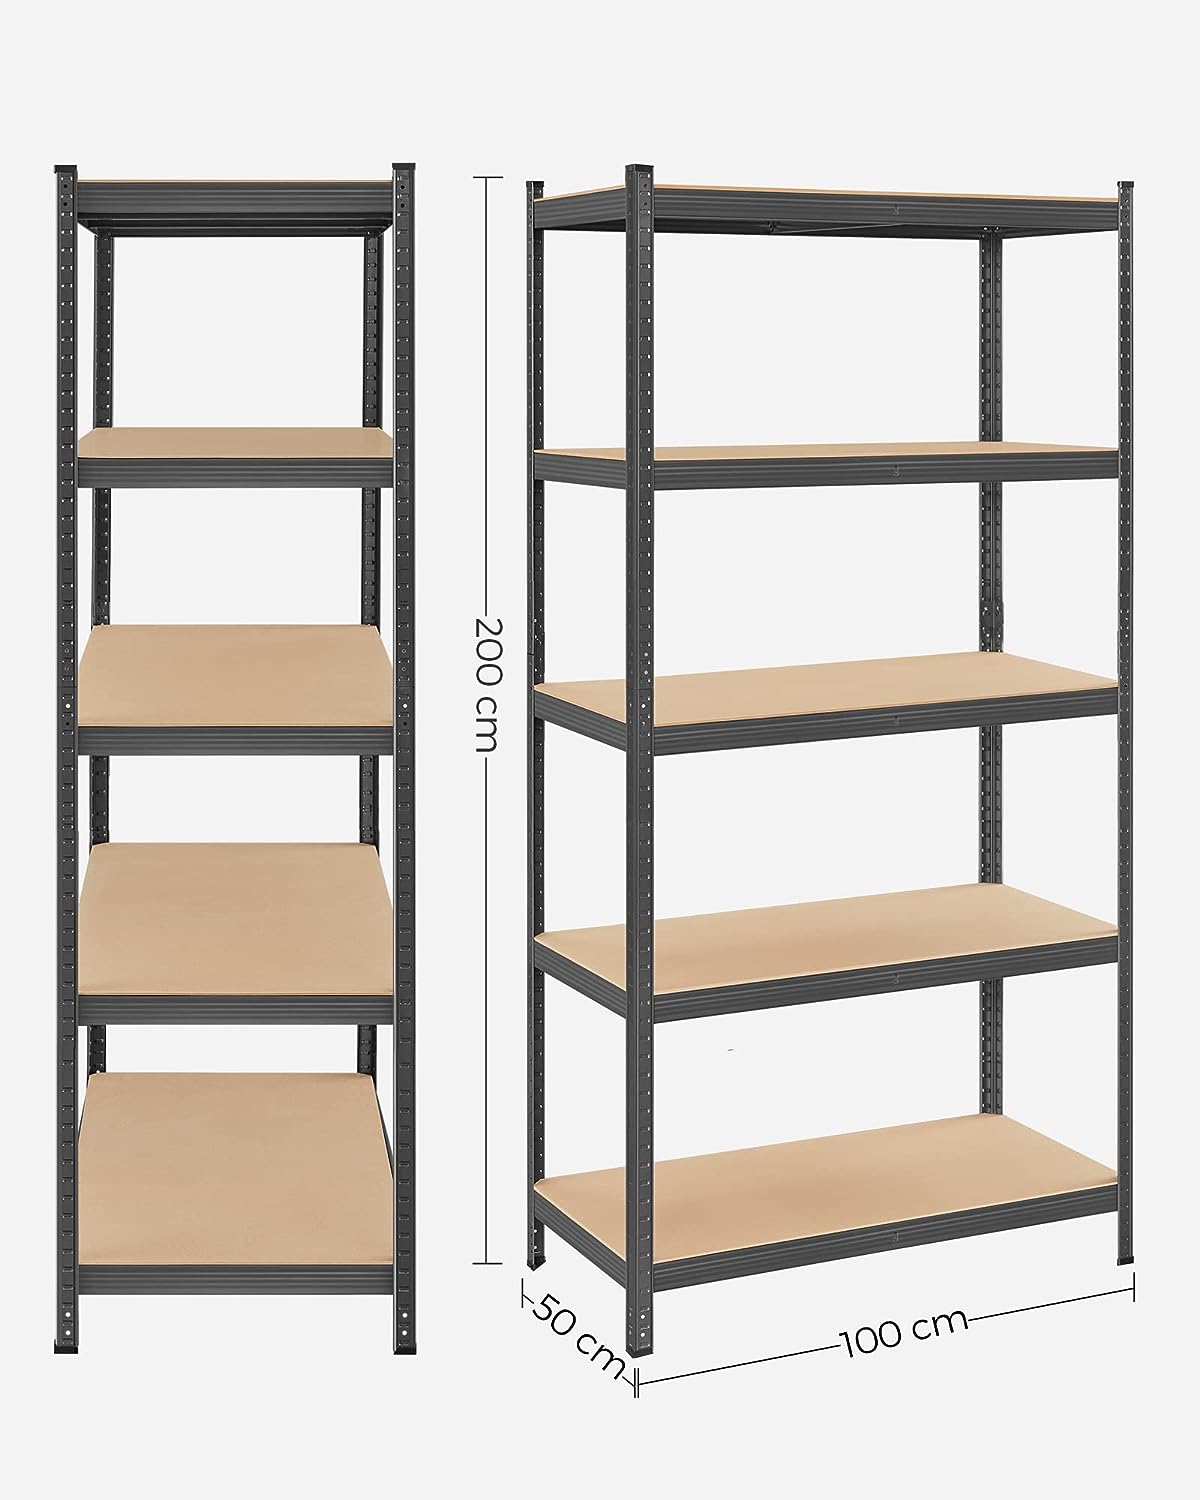 5-Tier Shelving Unit, Steel Shelving Unit for Storage, Boltless Assembly, for Garage, Shed, Load Capacity 600 kg, SONGMICS, 2